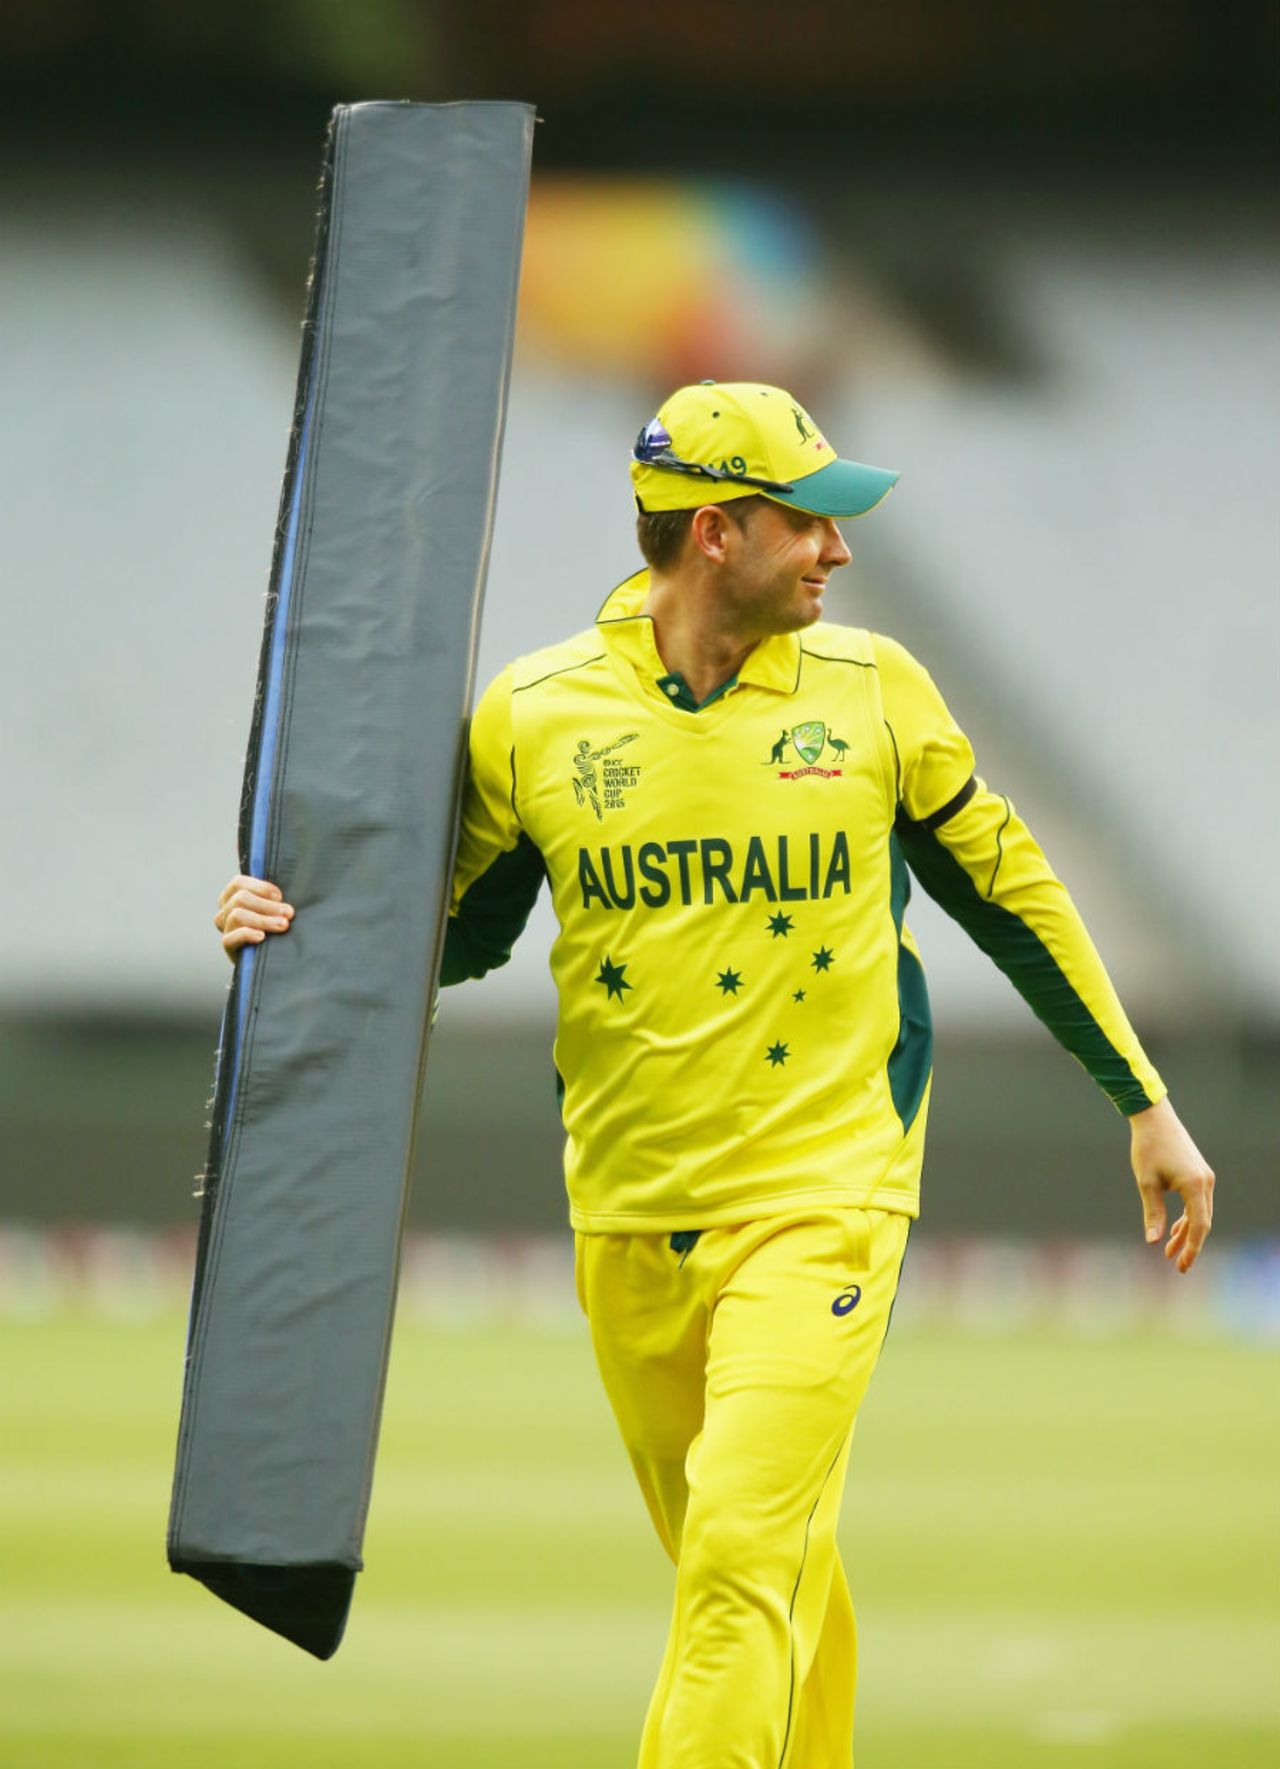 Michael Clarke picks up one of the boundary cushions that was blown onto the field, Australia v UAE, World Cup warm-up, Melbourne, February 11, 2015